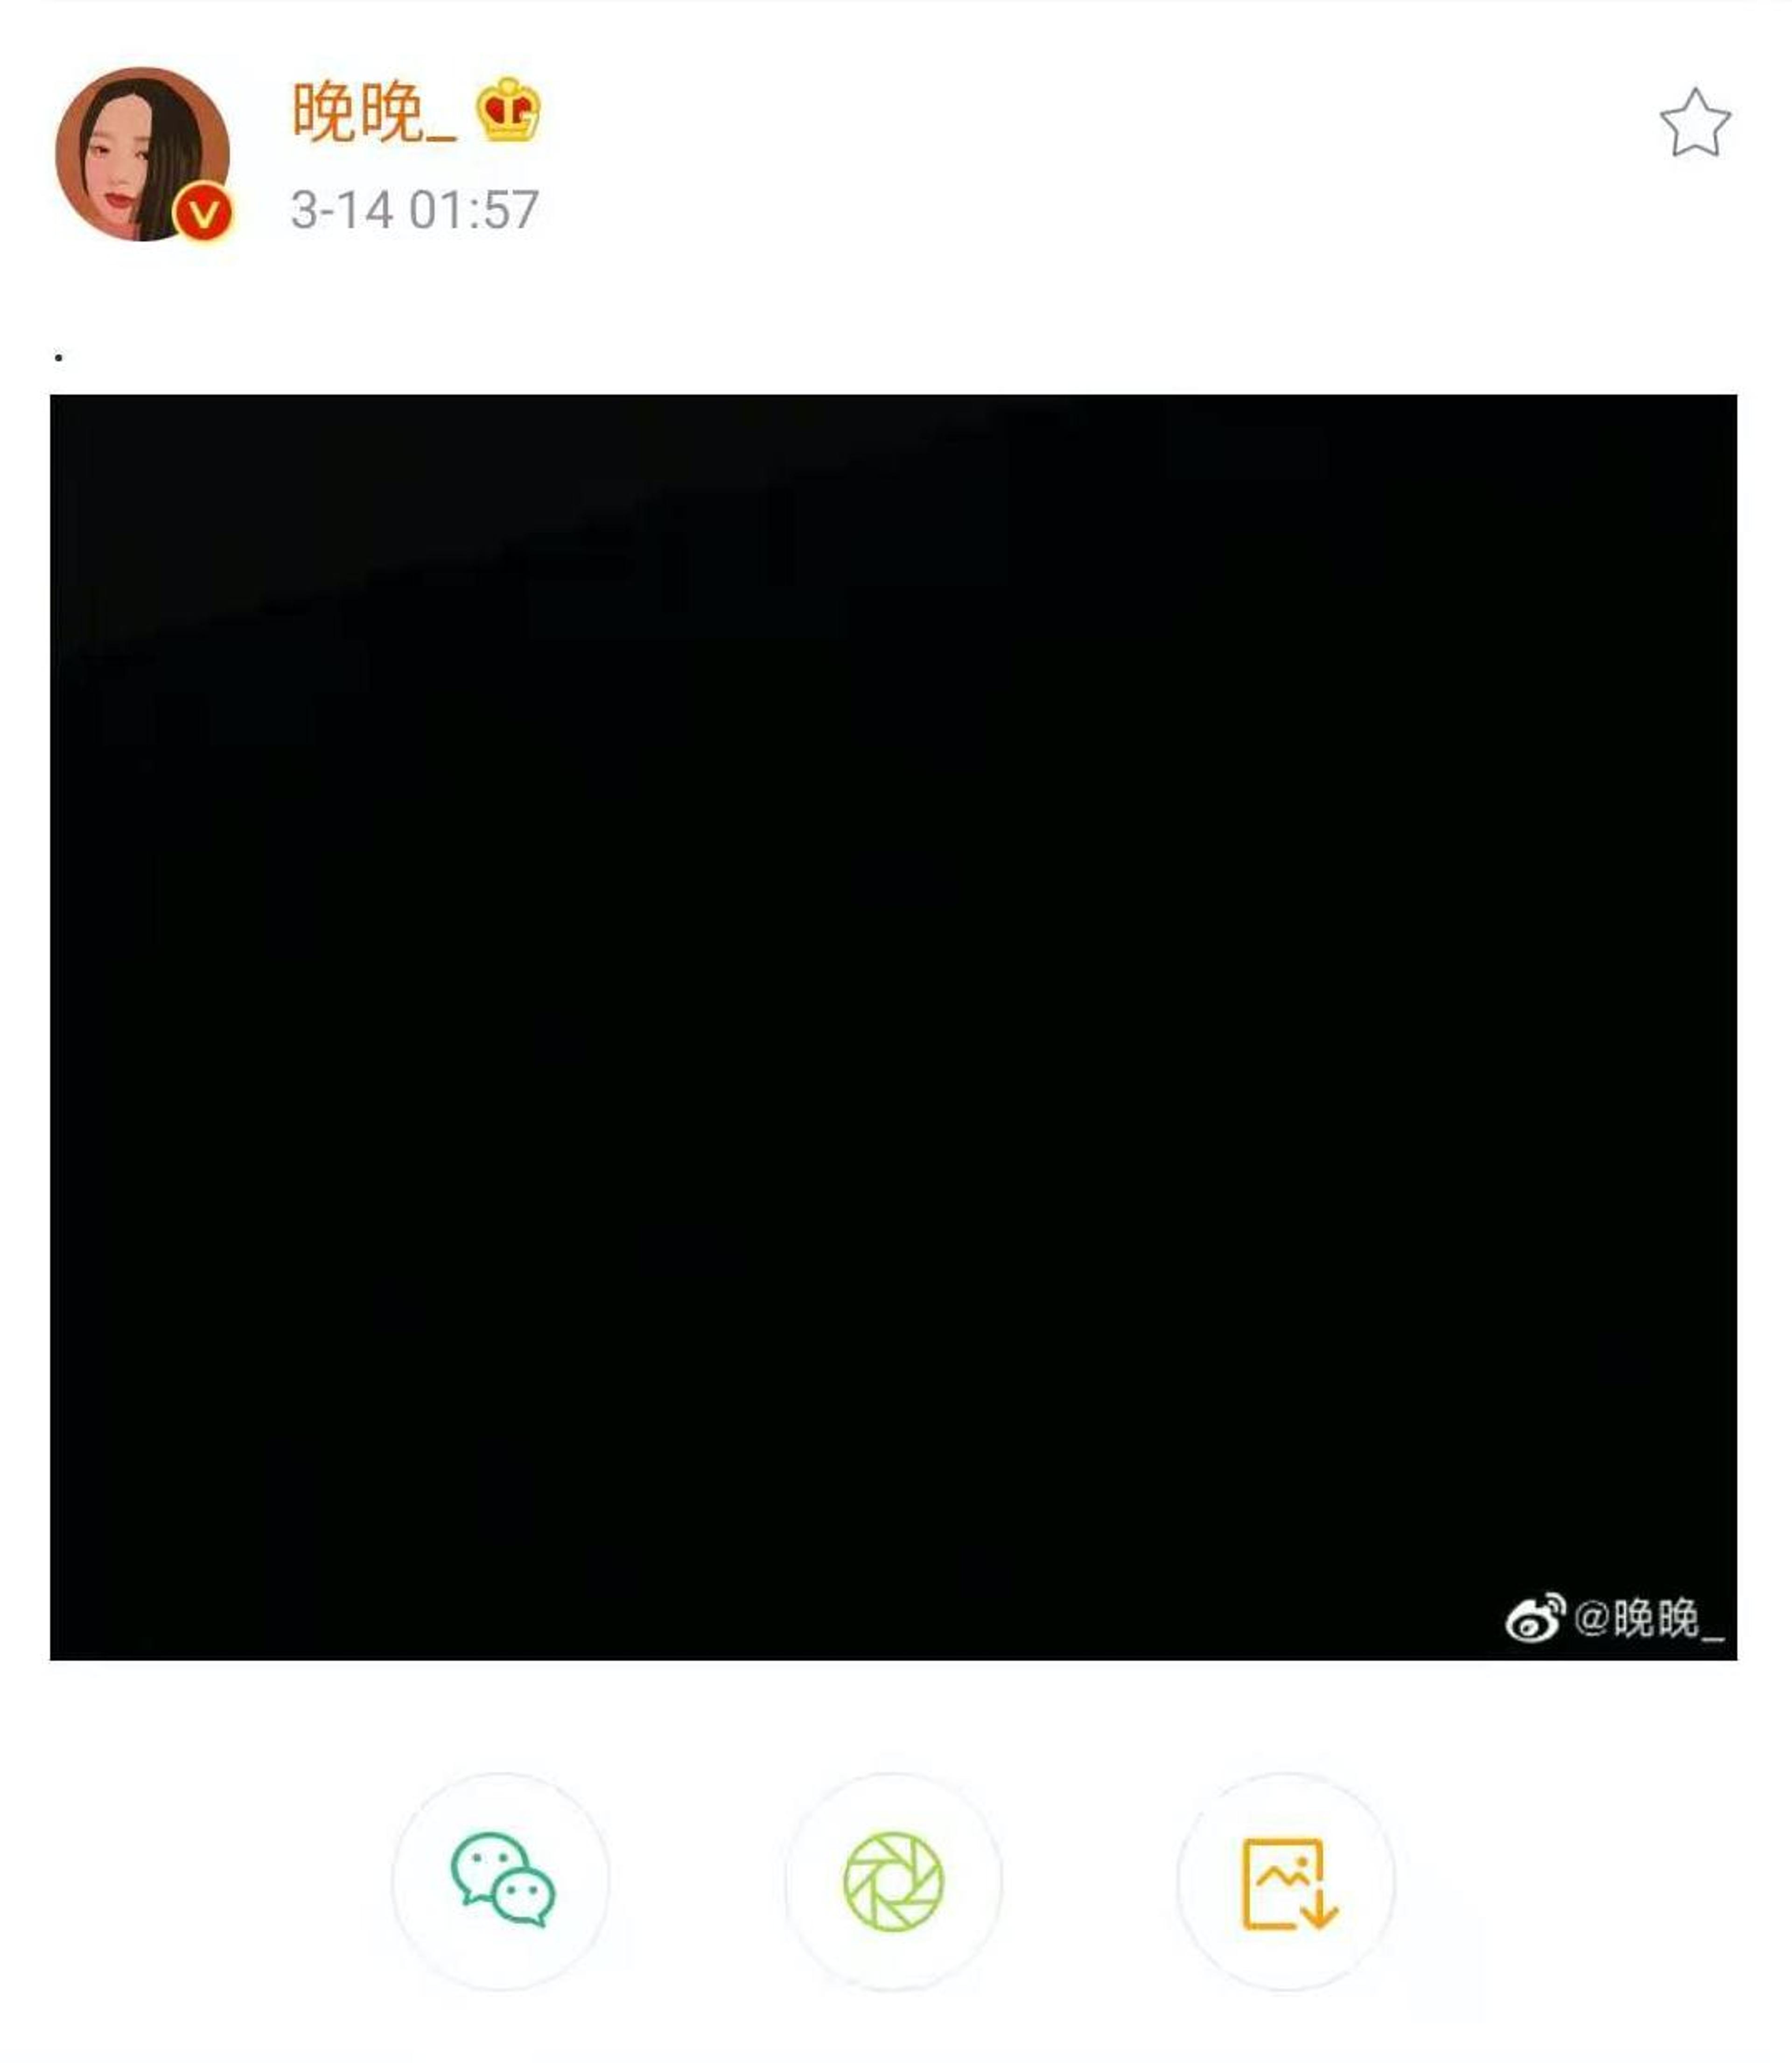 A screenshot of the black square on Lei&#39;s weibo